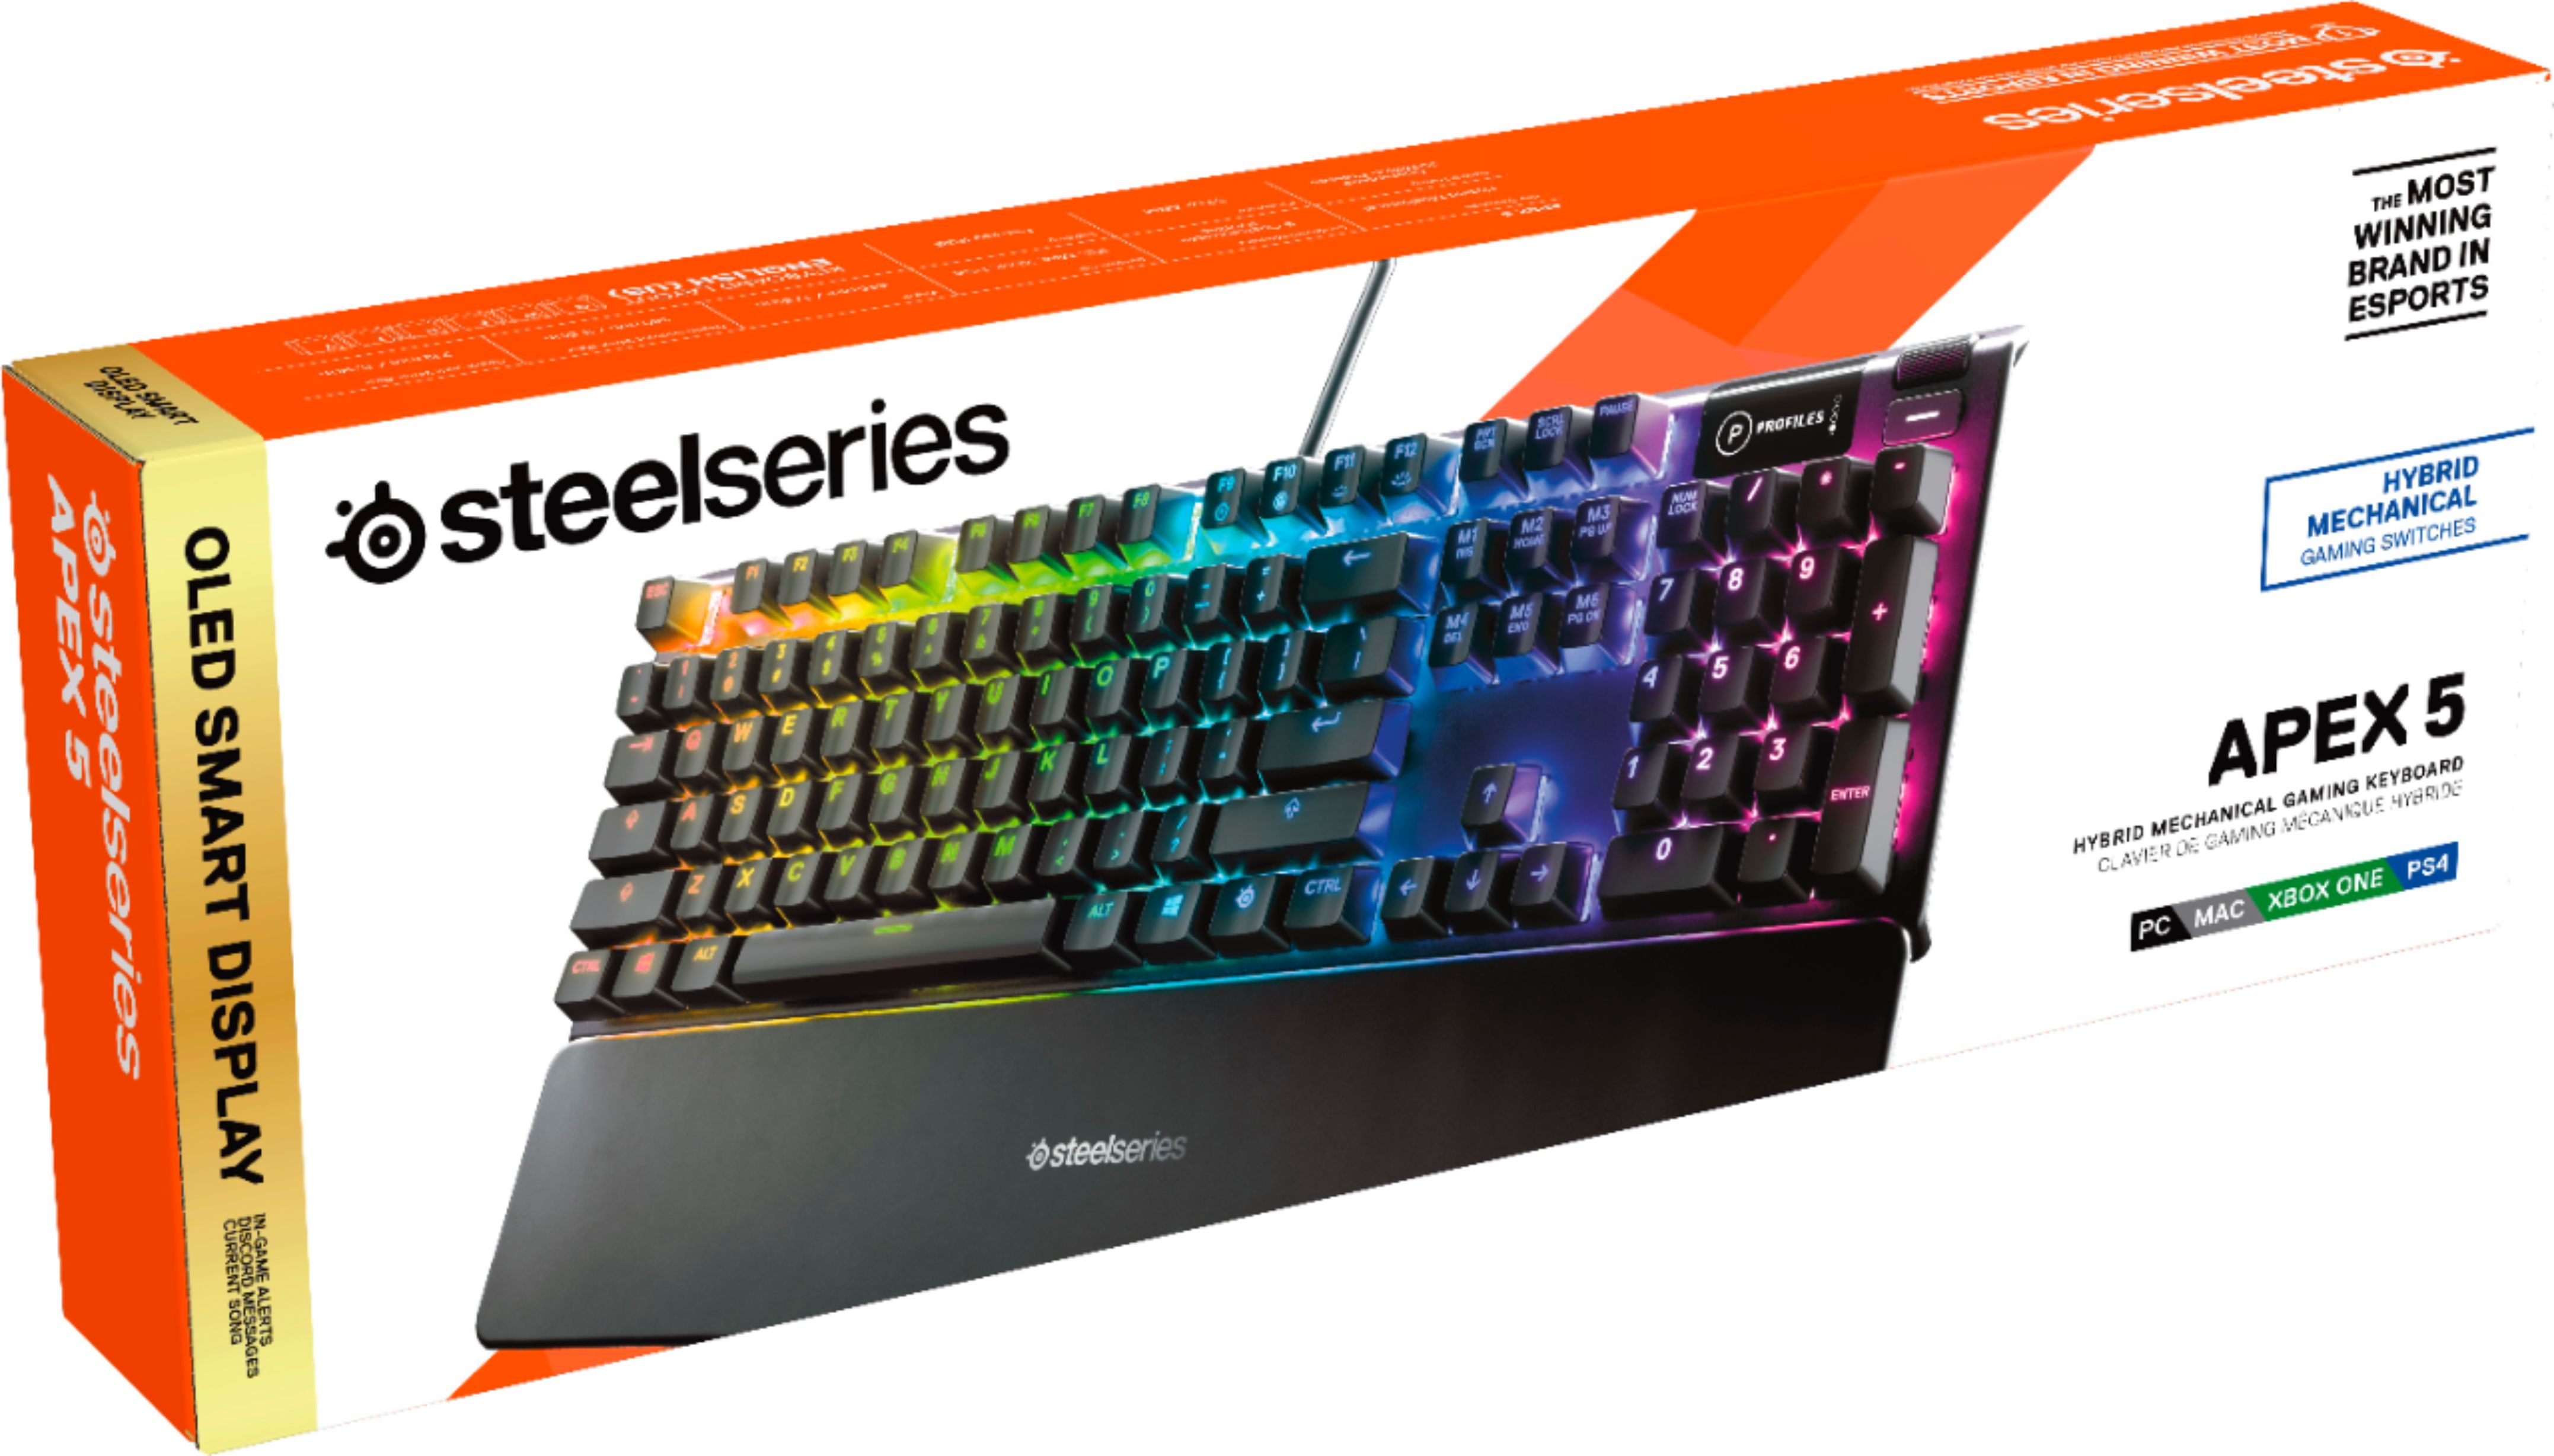 I know that people rag on the Steelseries Apex 5 for being mech